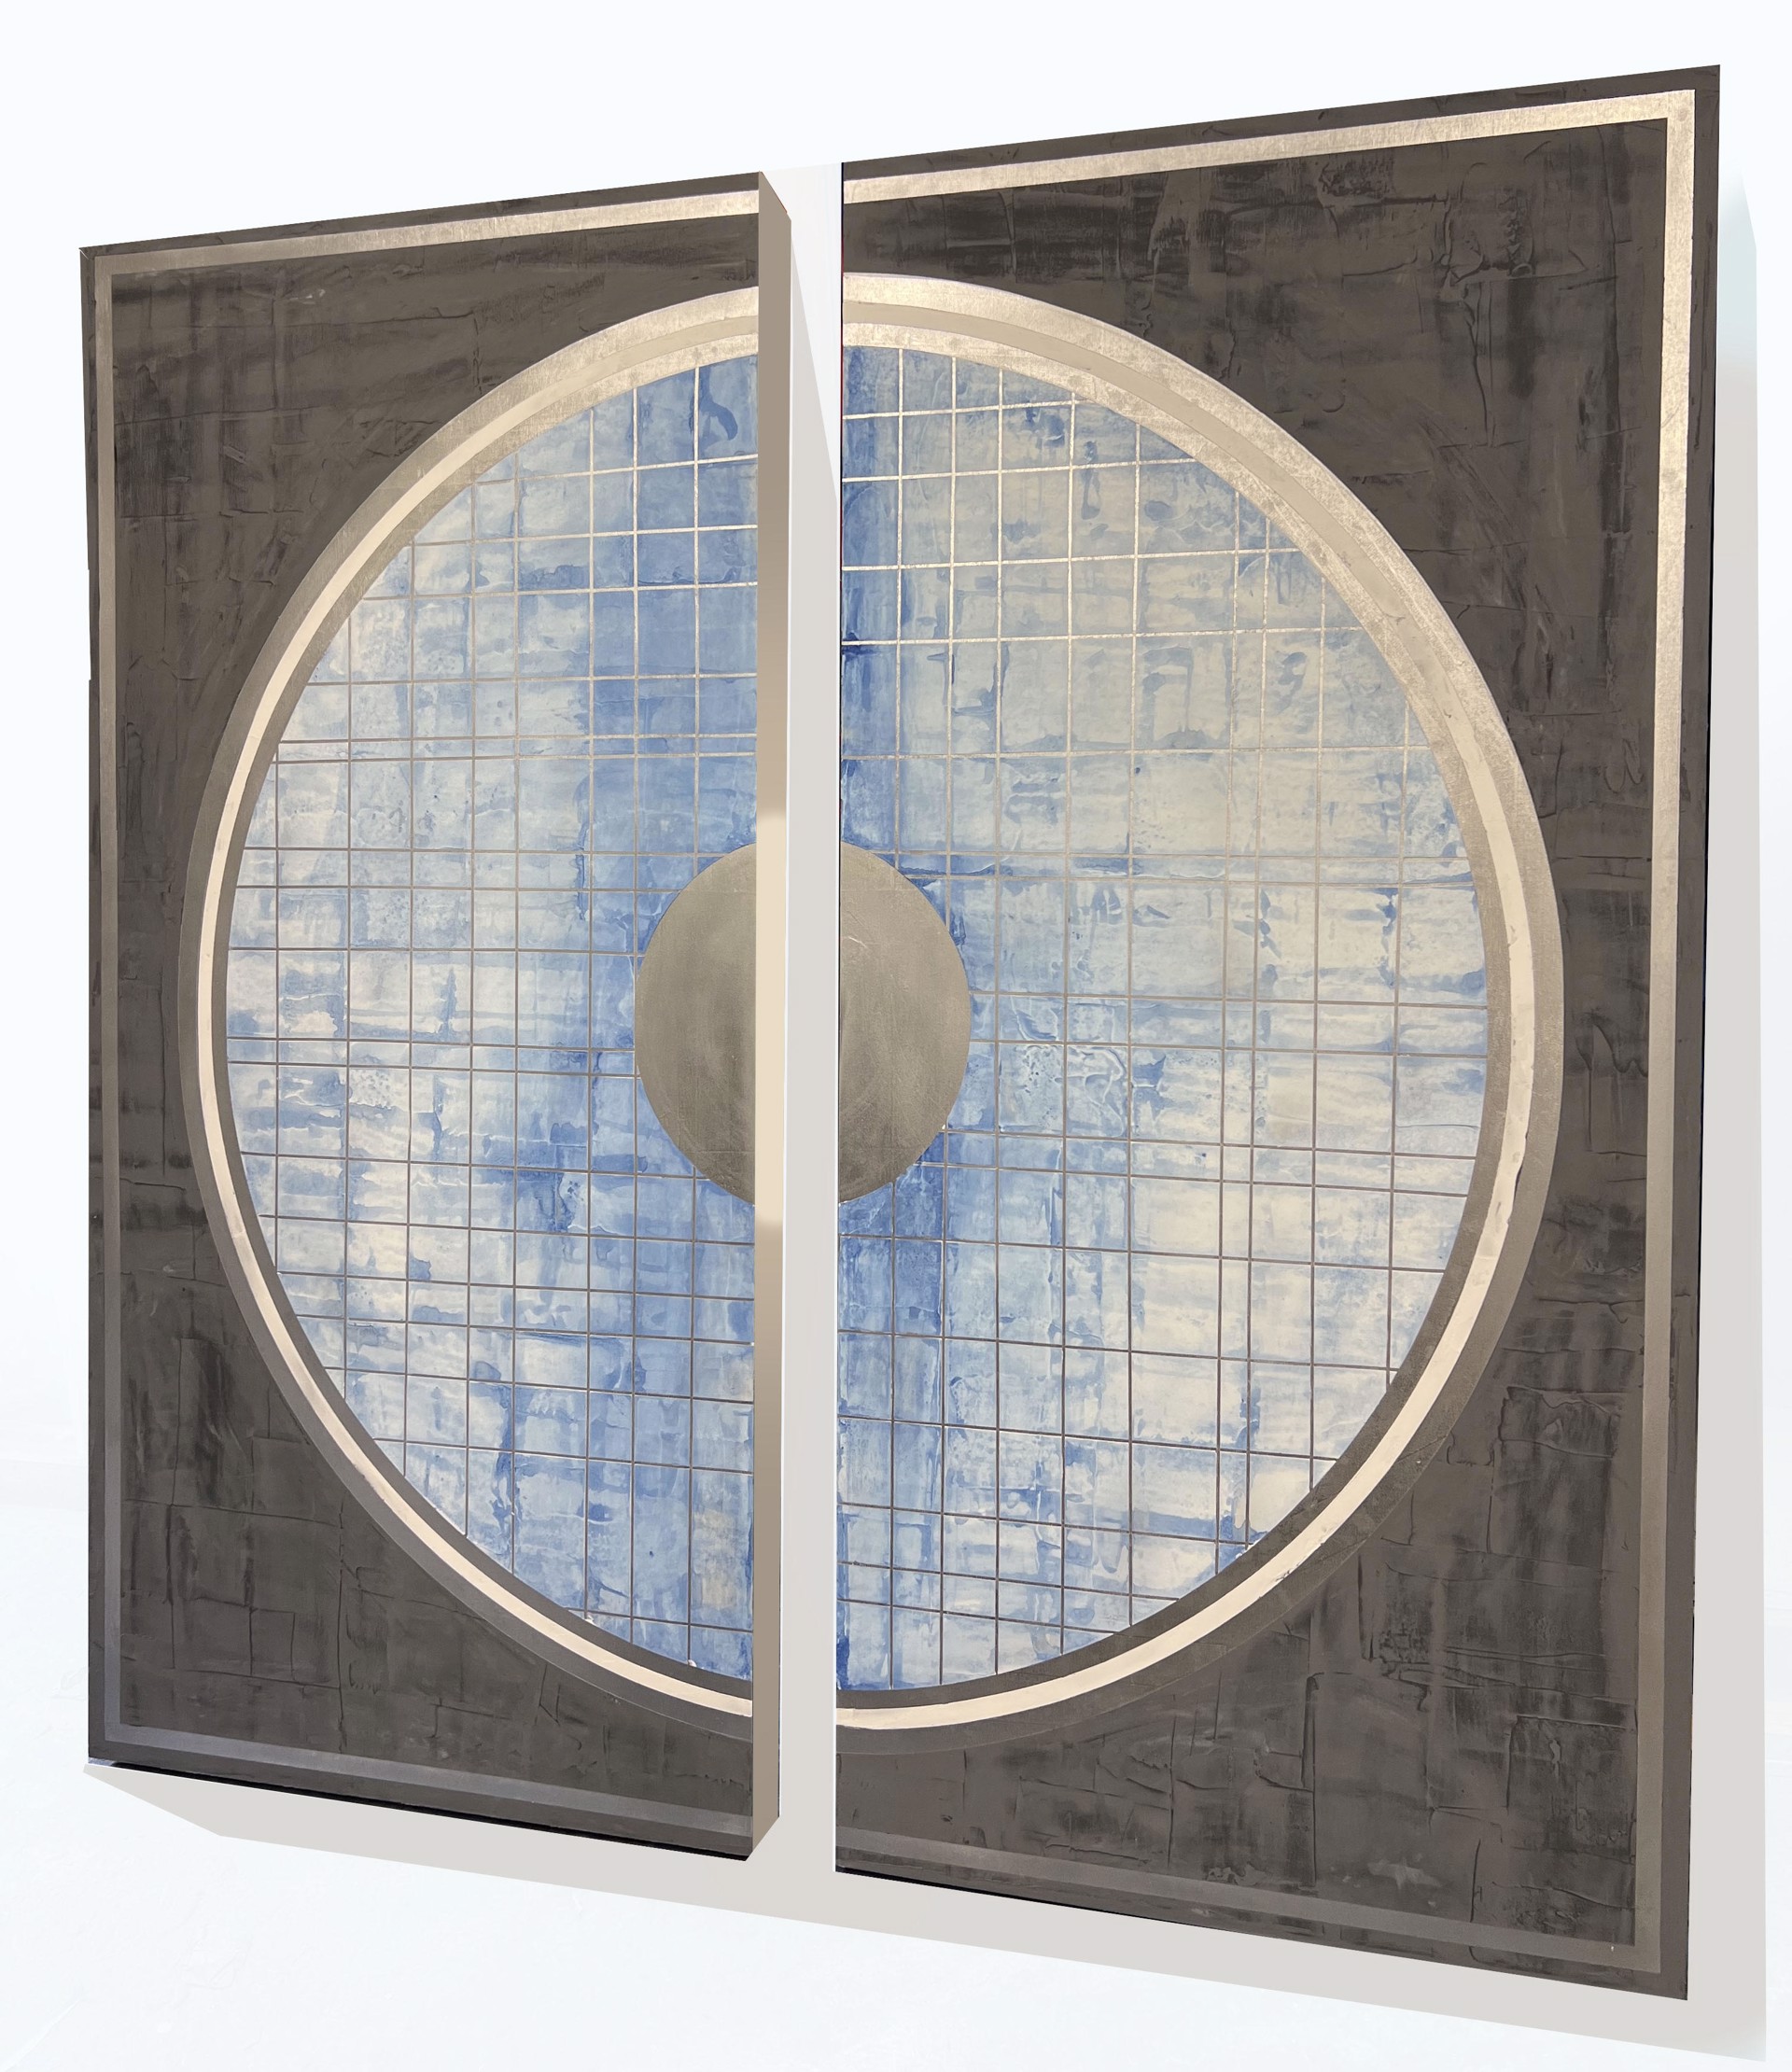 California artist and painter Stephanie Paige's 60"H x 60"W painting Quietude is a beautiful diptych made of two wood panels with layers of grey marble plaster paint and features a quilted textured circle with whites and blues.